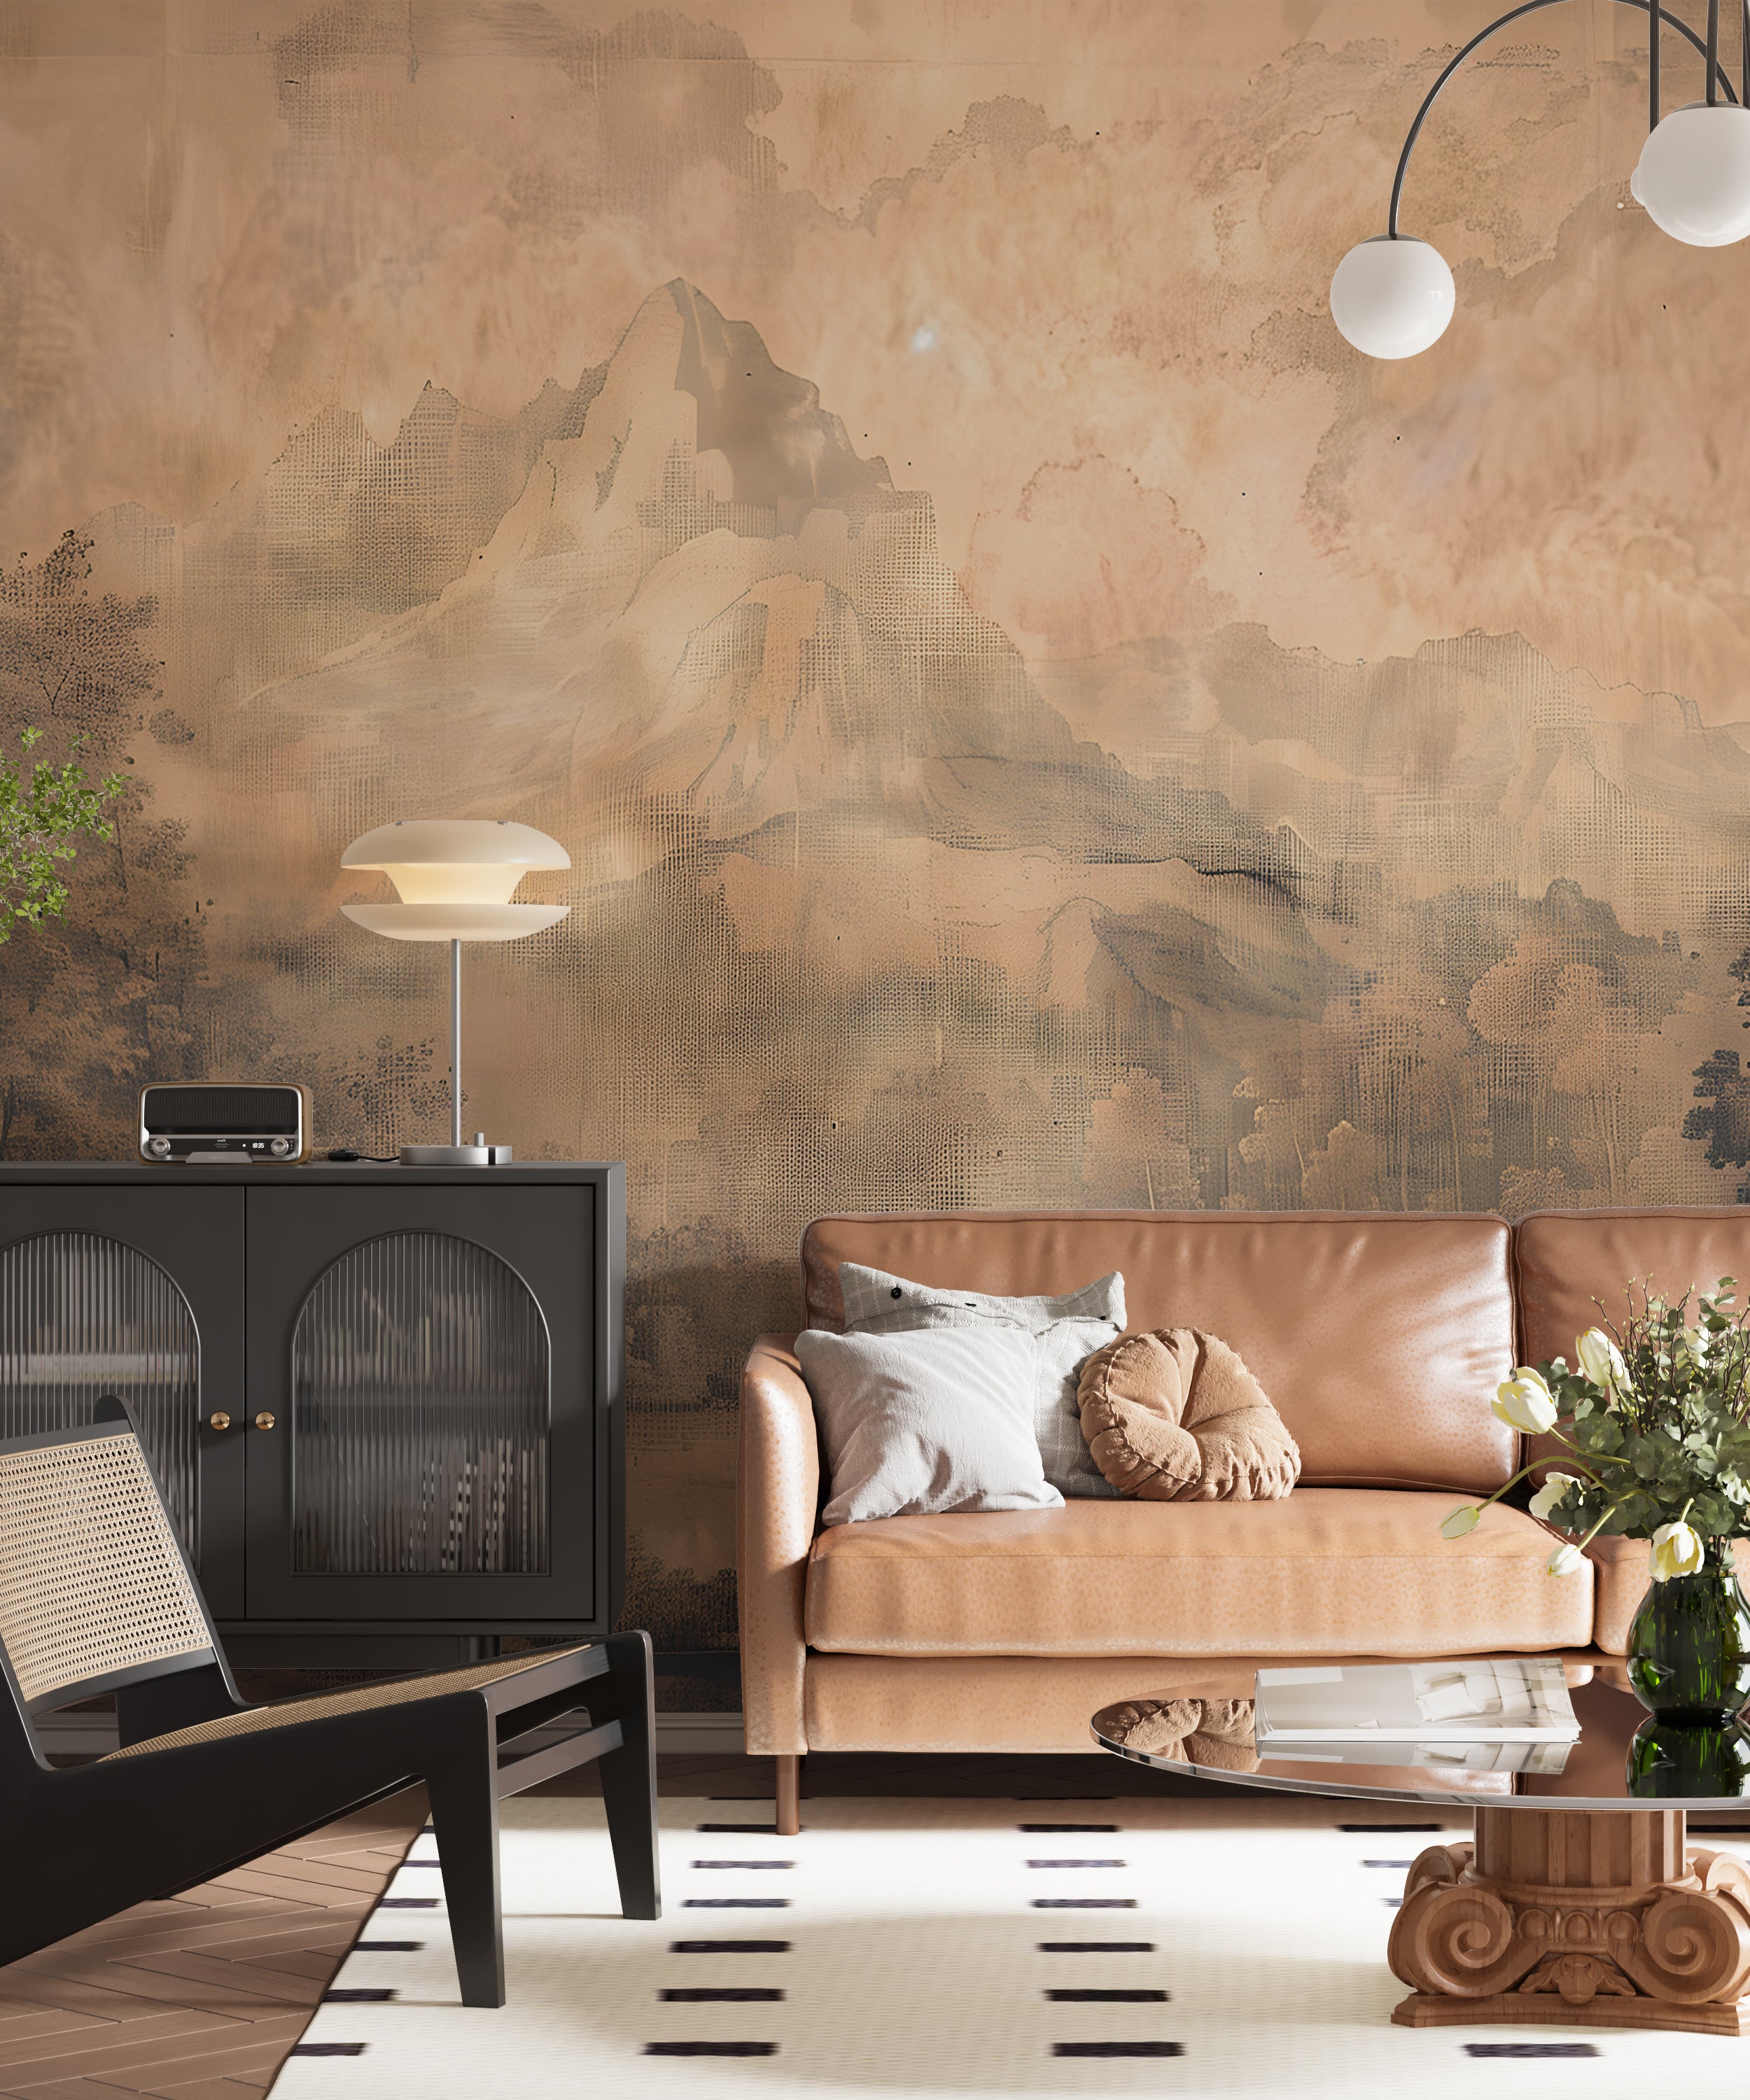 Vintage Scenic Wallpaper, Landscape Old Style Mural, Mountain and Forest Sepia Wallpaper, Peel and Stick Rustic Nature Painting Wall Art